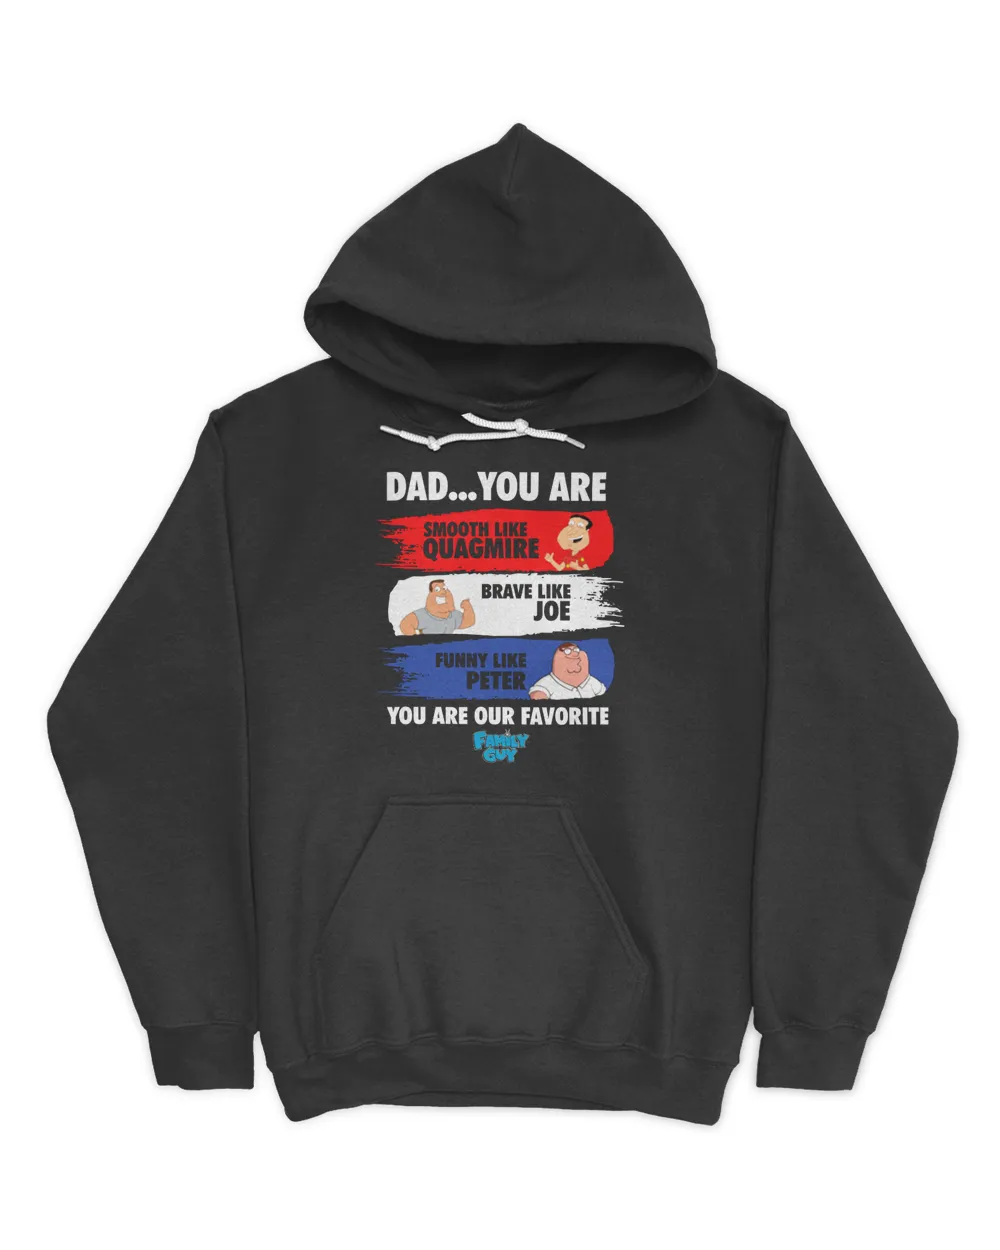 Dad You Are Smooth Like Quagmire Brave Like Joe Funny Like Peter You Are  Our Favorite Family Guy Hoodie | SenPrints